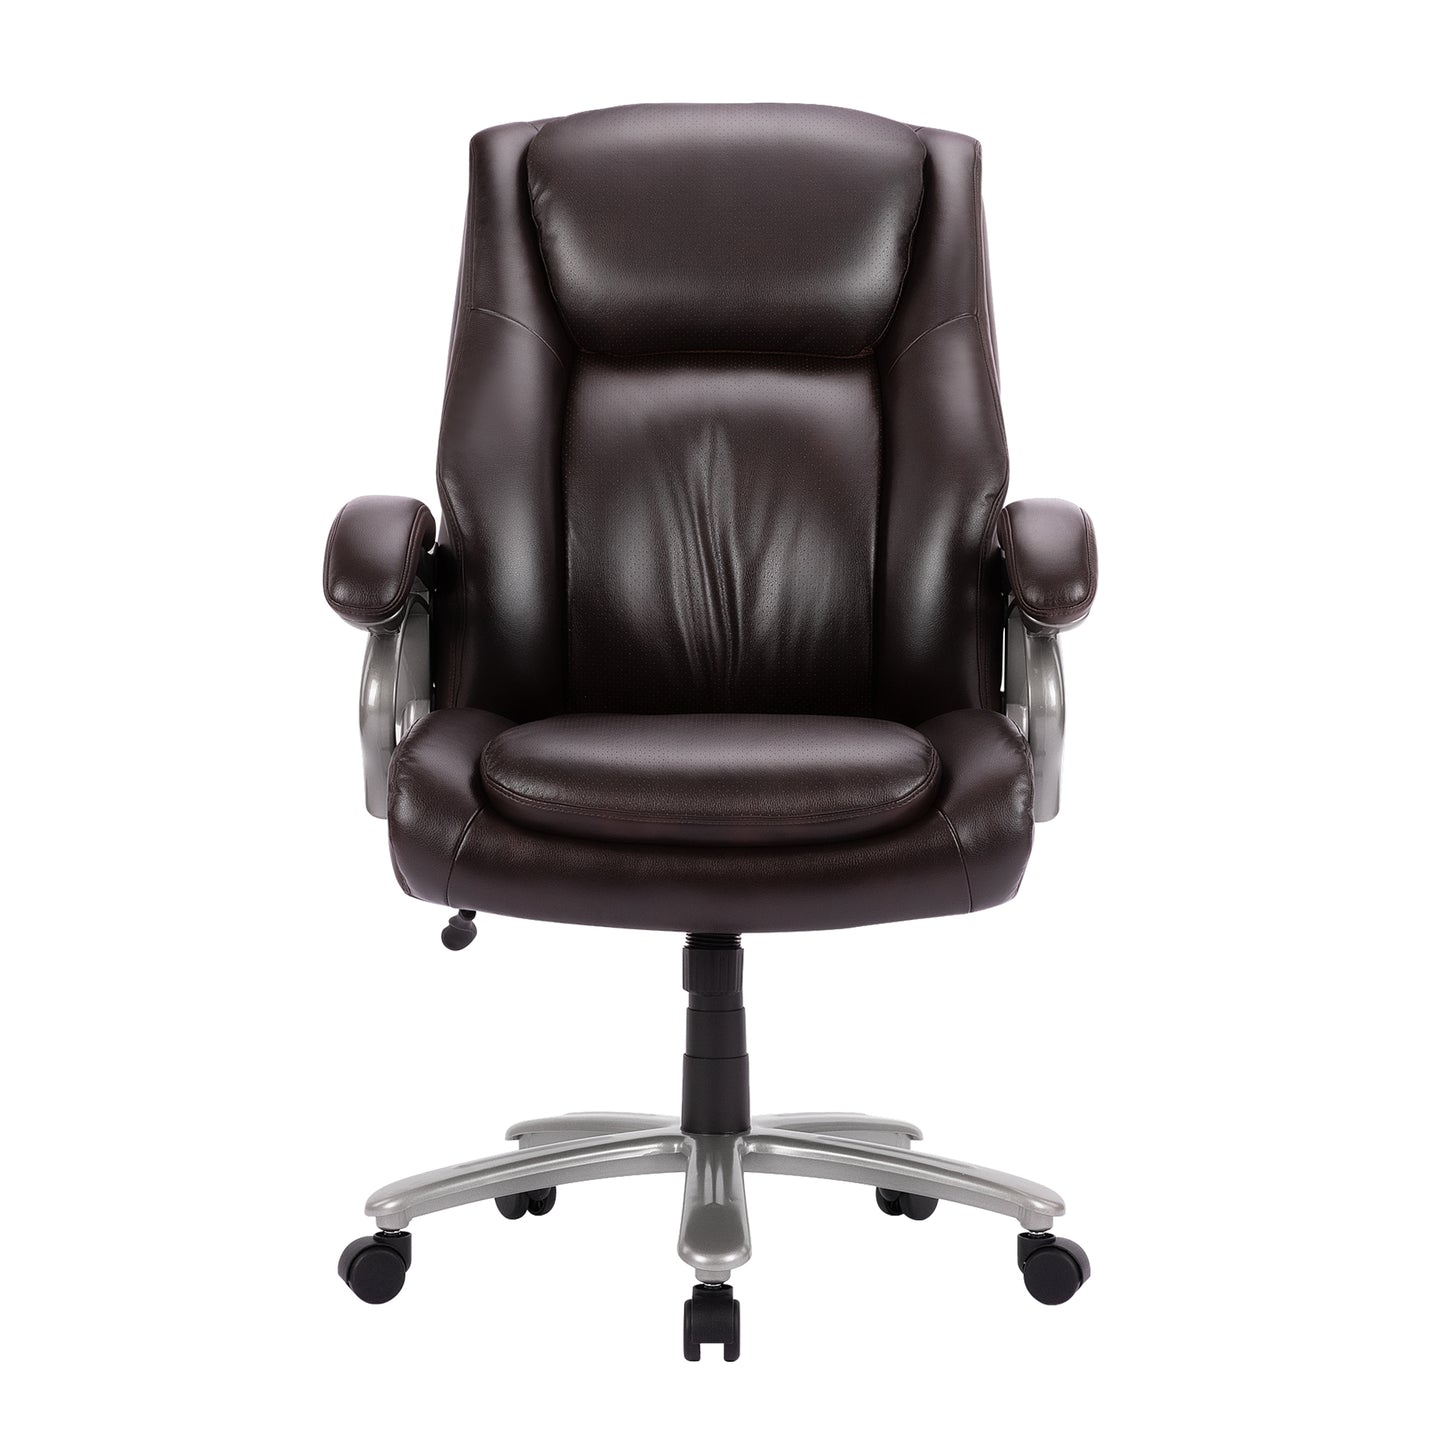 COLAMY Executive Desk Chair 400lbs Big & Tall Faux Leather Office Chair Model.5103